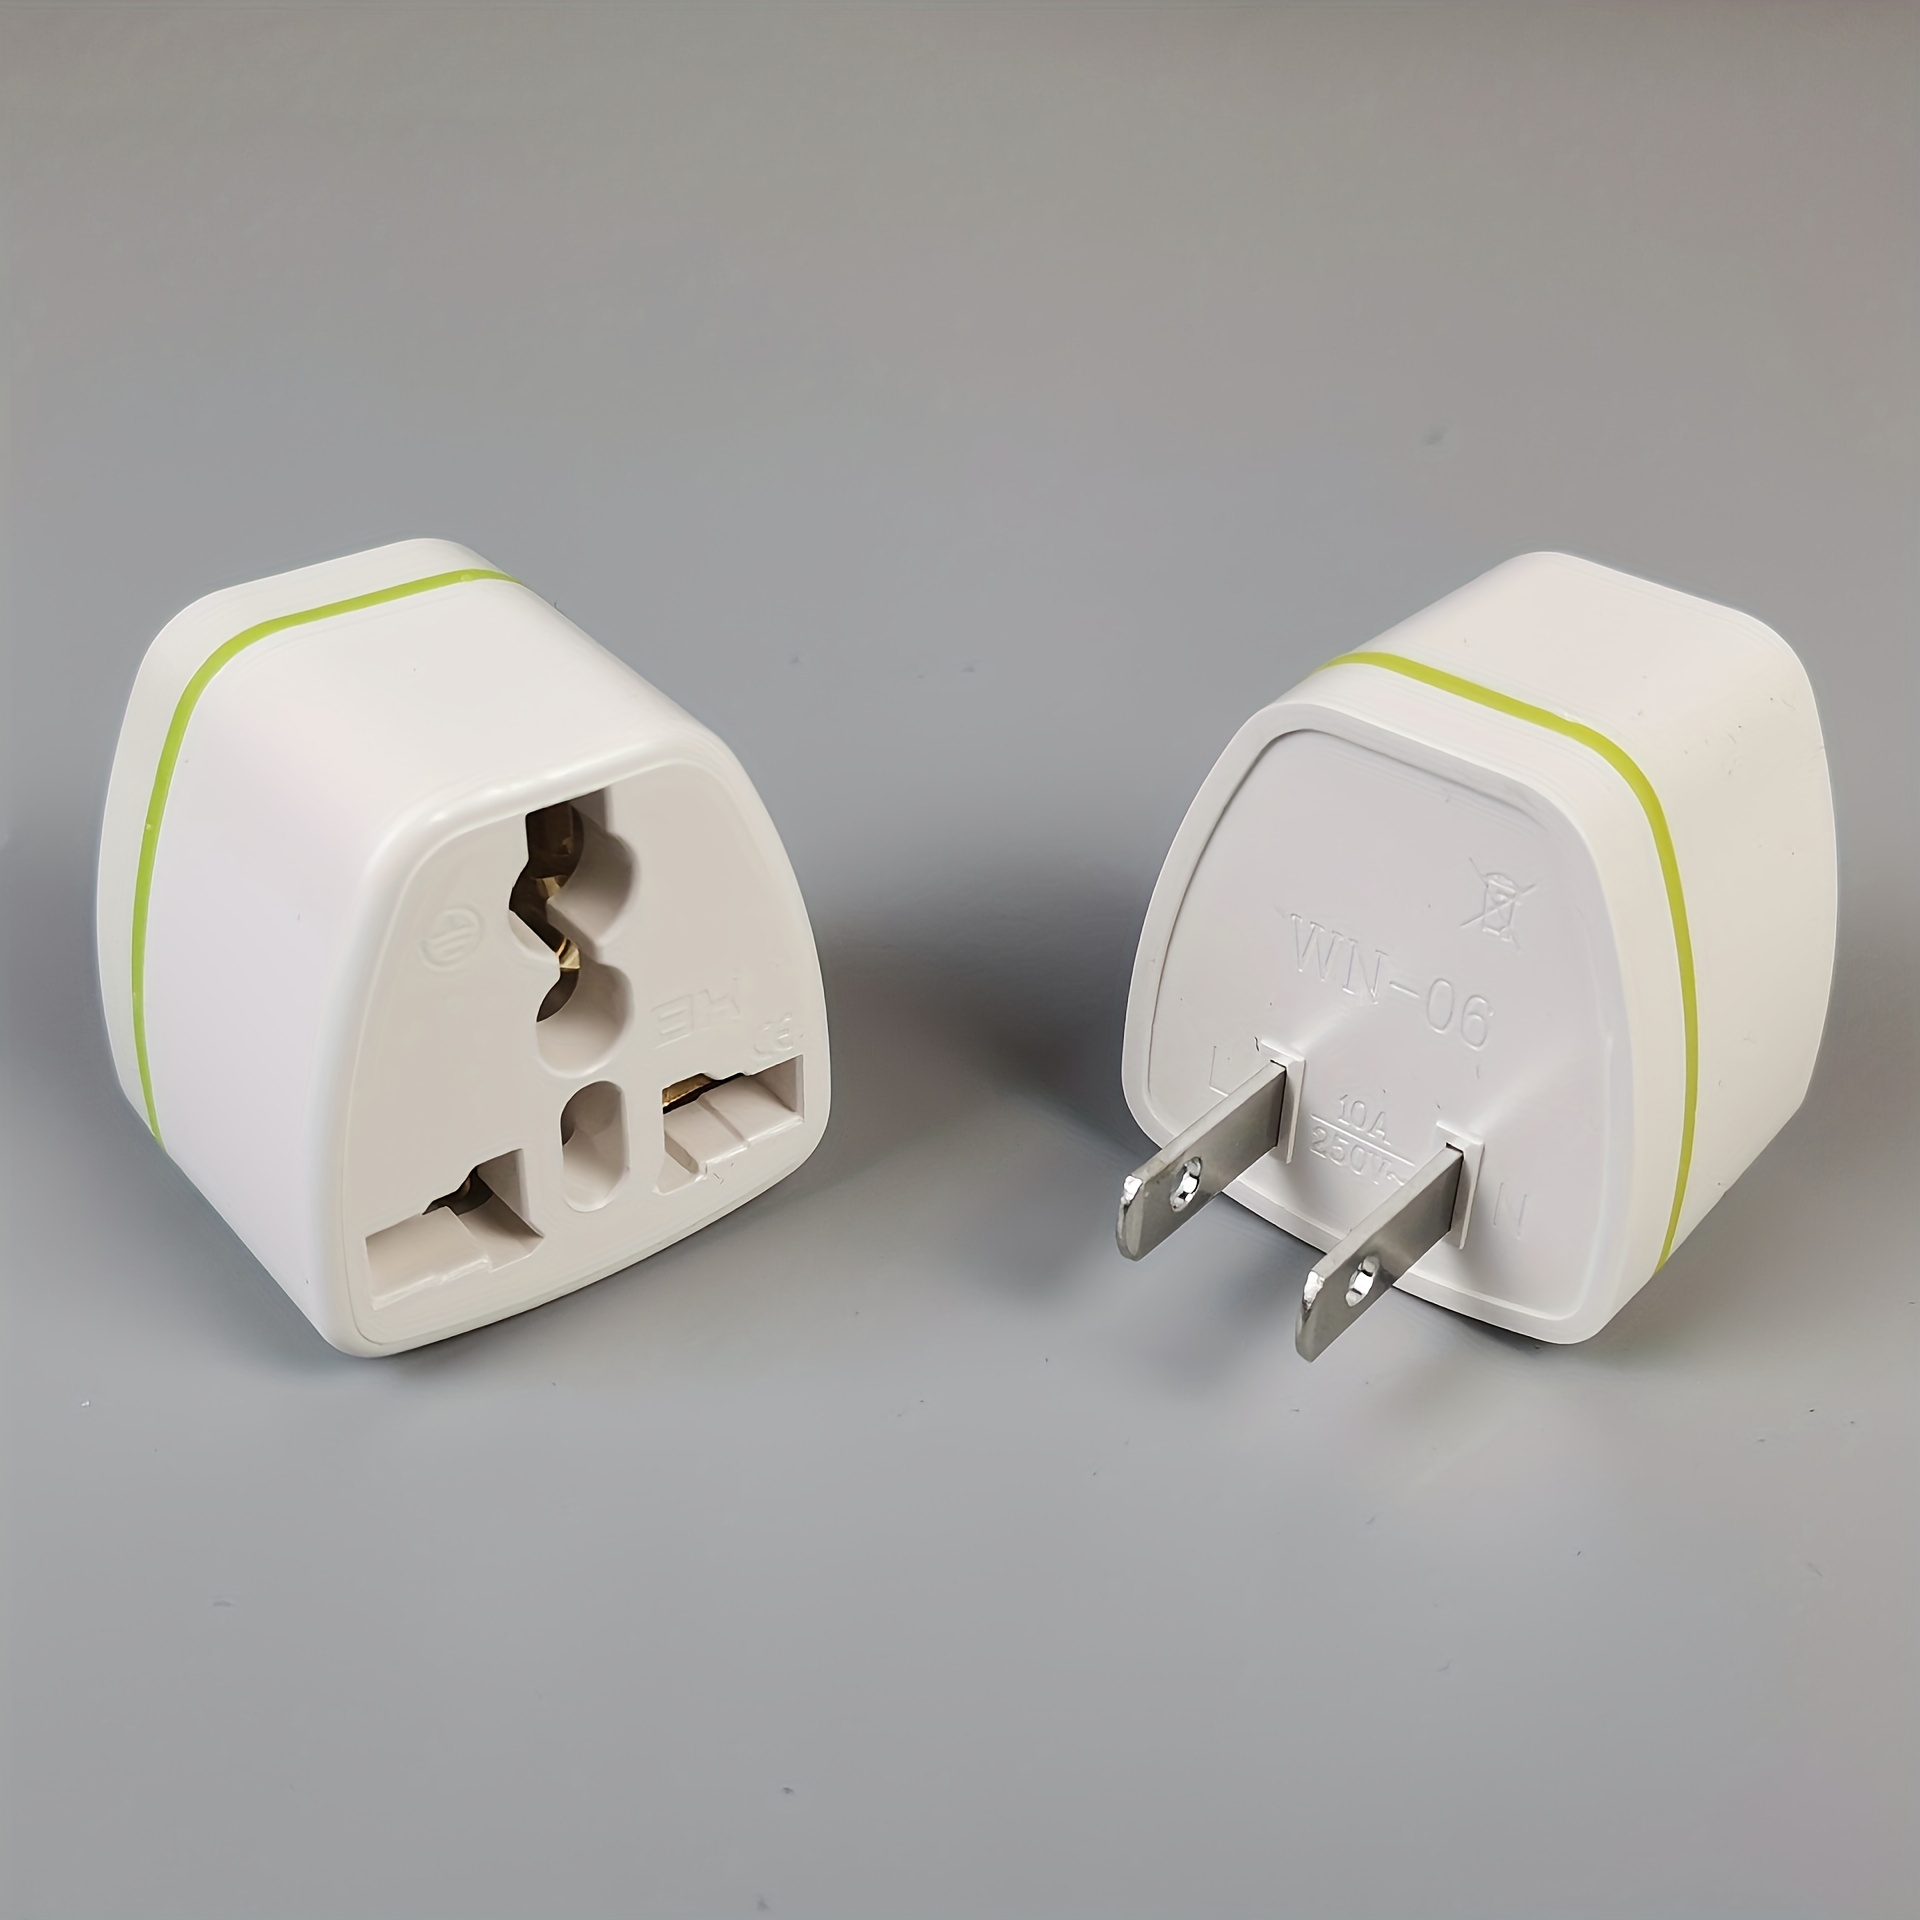 Universal Travel Adapter Plug Adaptor 3-Way US Type A 2-Pin AC Power Socket  Electrical Converters Flat Plug Adapter For Home Appliances, Refrigerator,  Washing Machine, Aircon, Electric Fan, TV, Cellphone, Tablet, PC, Printer